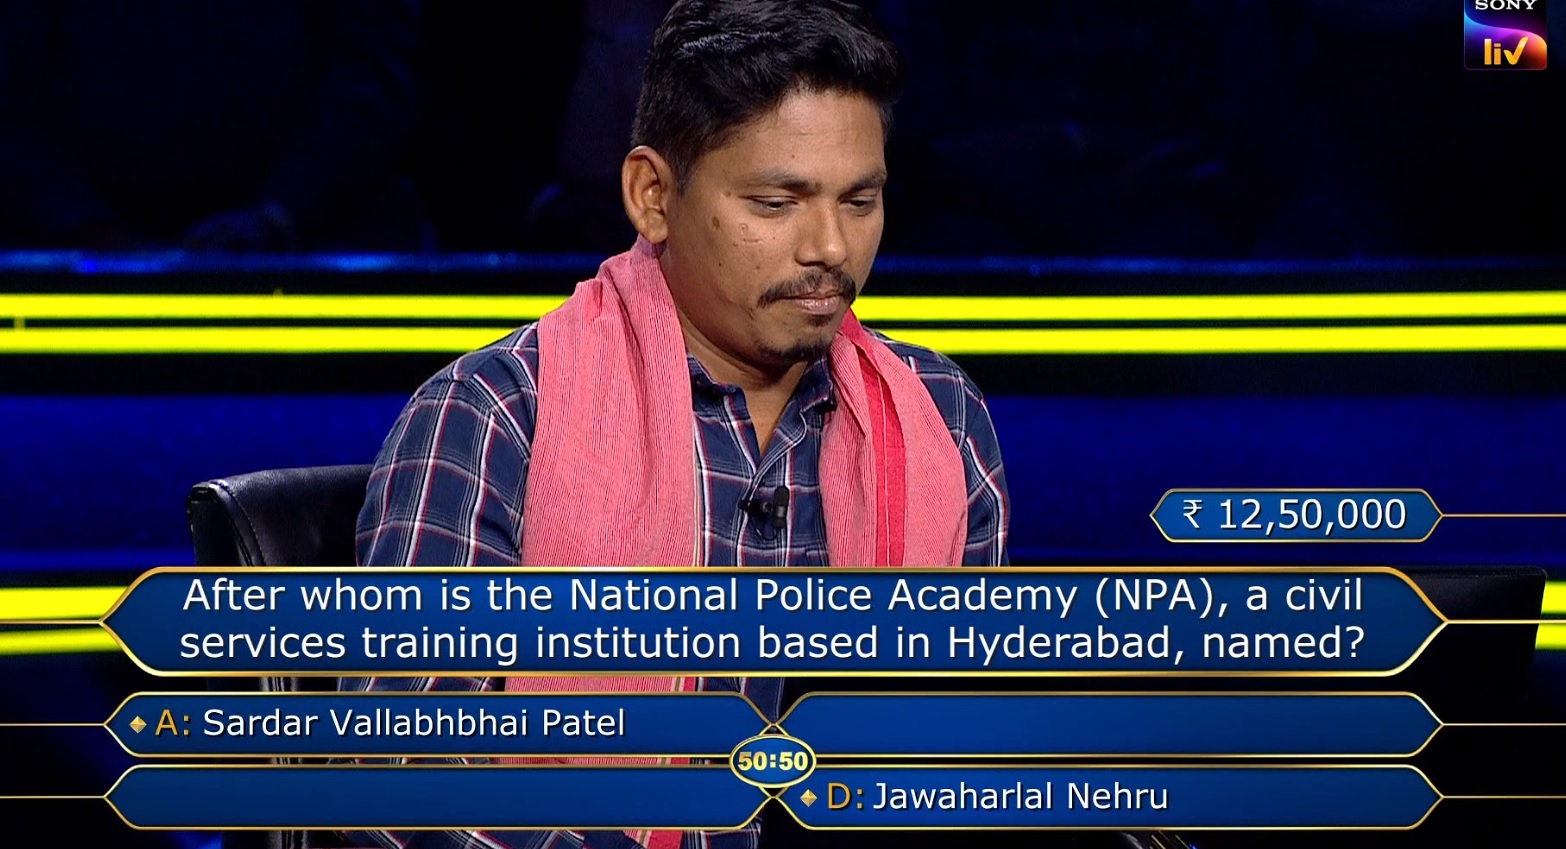 Ques : After whom is the National Police Academy (NPA), is civil services training institution based in Hyderabad, named?